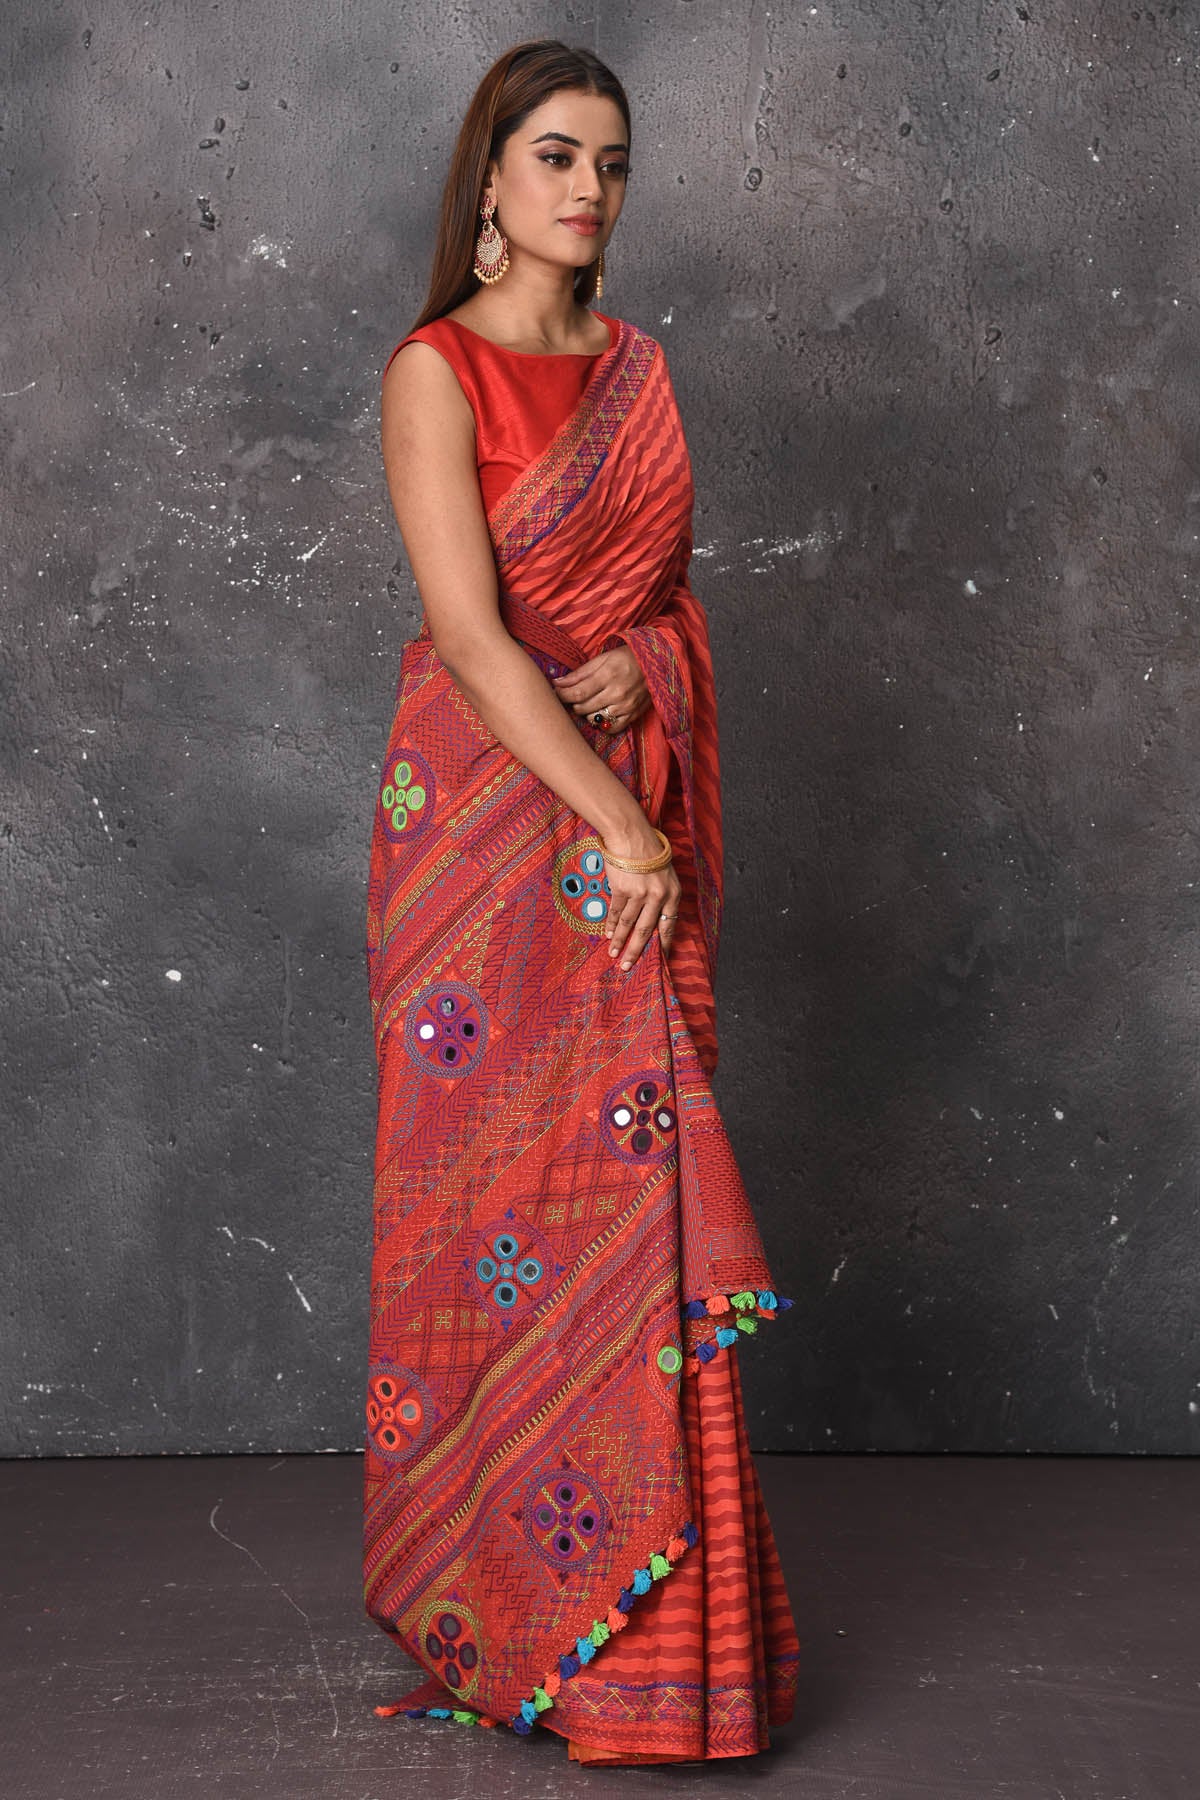 Buy this classy red hand painted madhubani cotton leheriya pattern saree online in USA. Perfect to be worn as part of your everyday work wear, with this hand-painted red Madhubani saree, elegance meets traditional. Add this designer Lambani embroidery designer saree with colored tassels to your collection from Pure Elegance Indian Fashion Store in USA.- Side view with wrapped pallu.